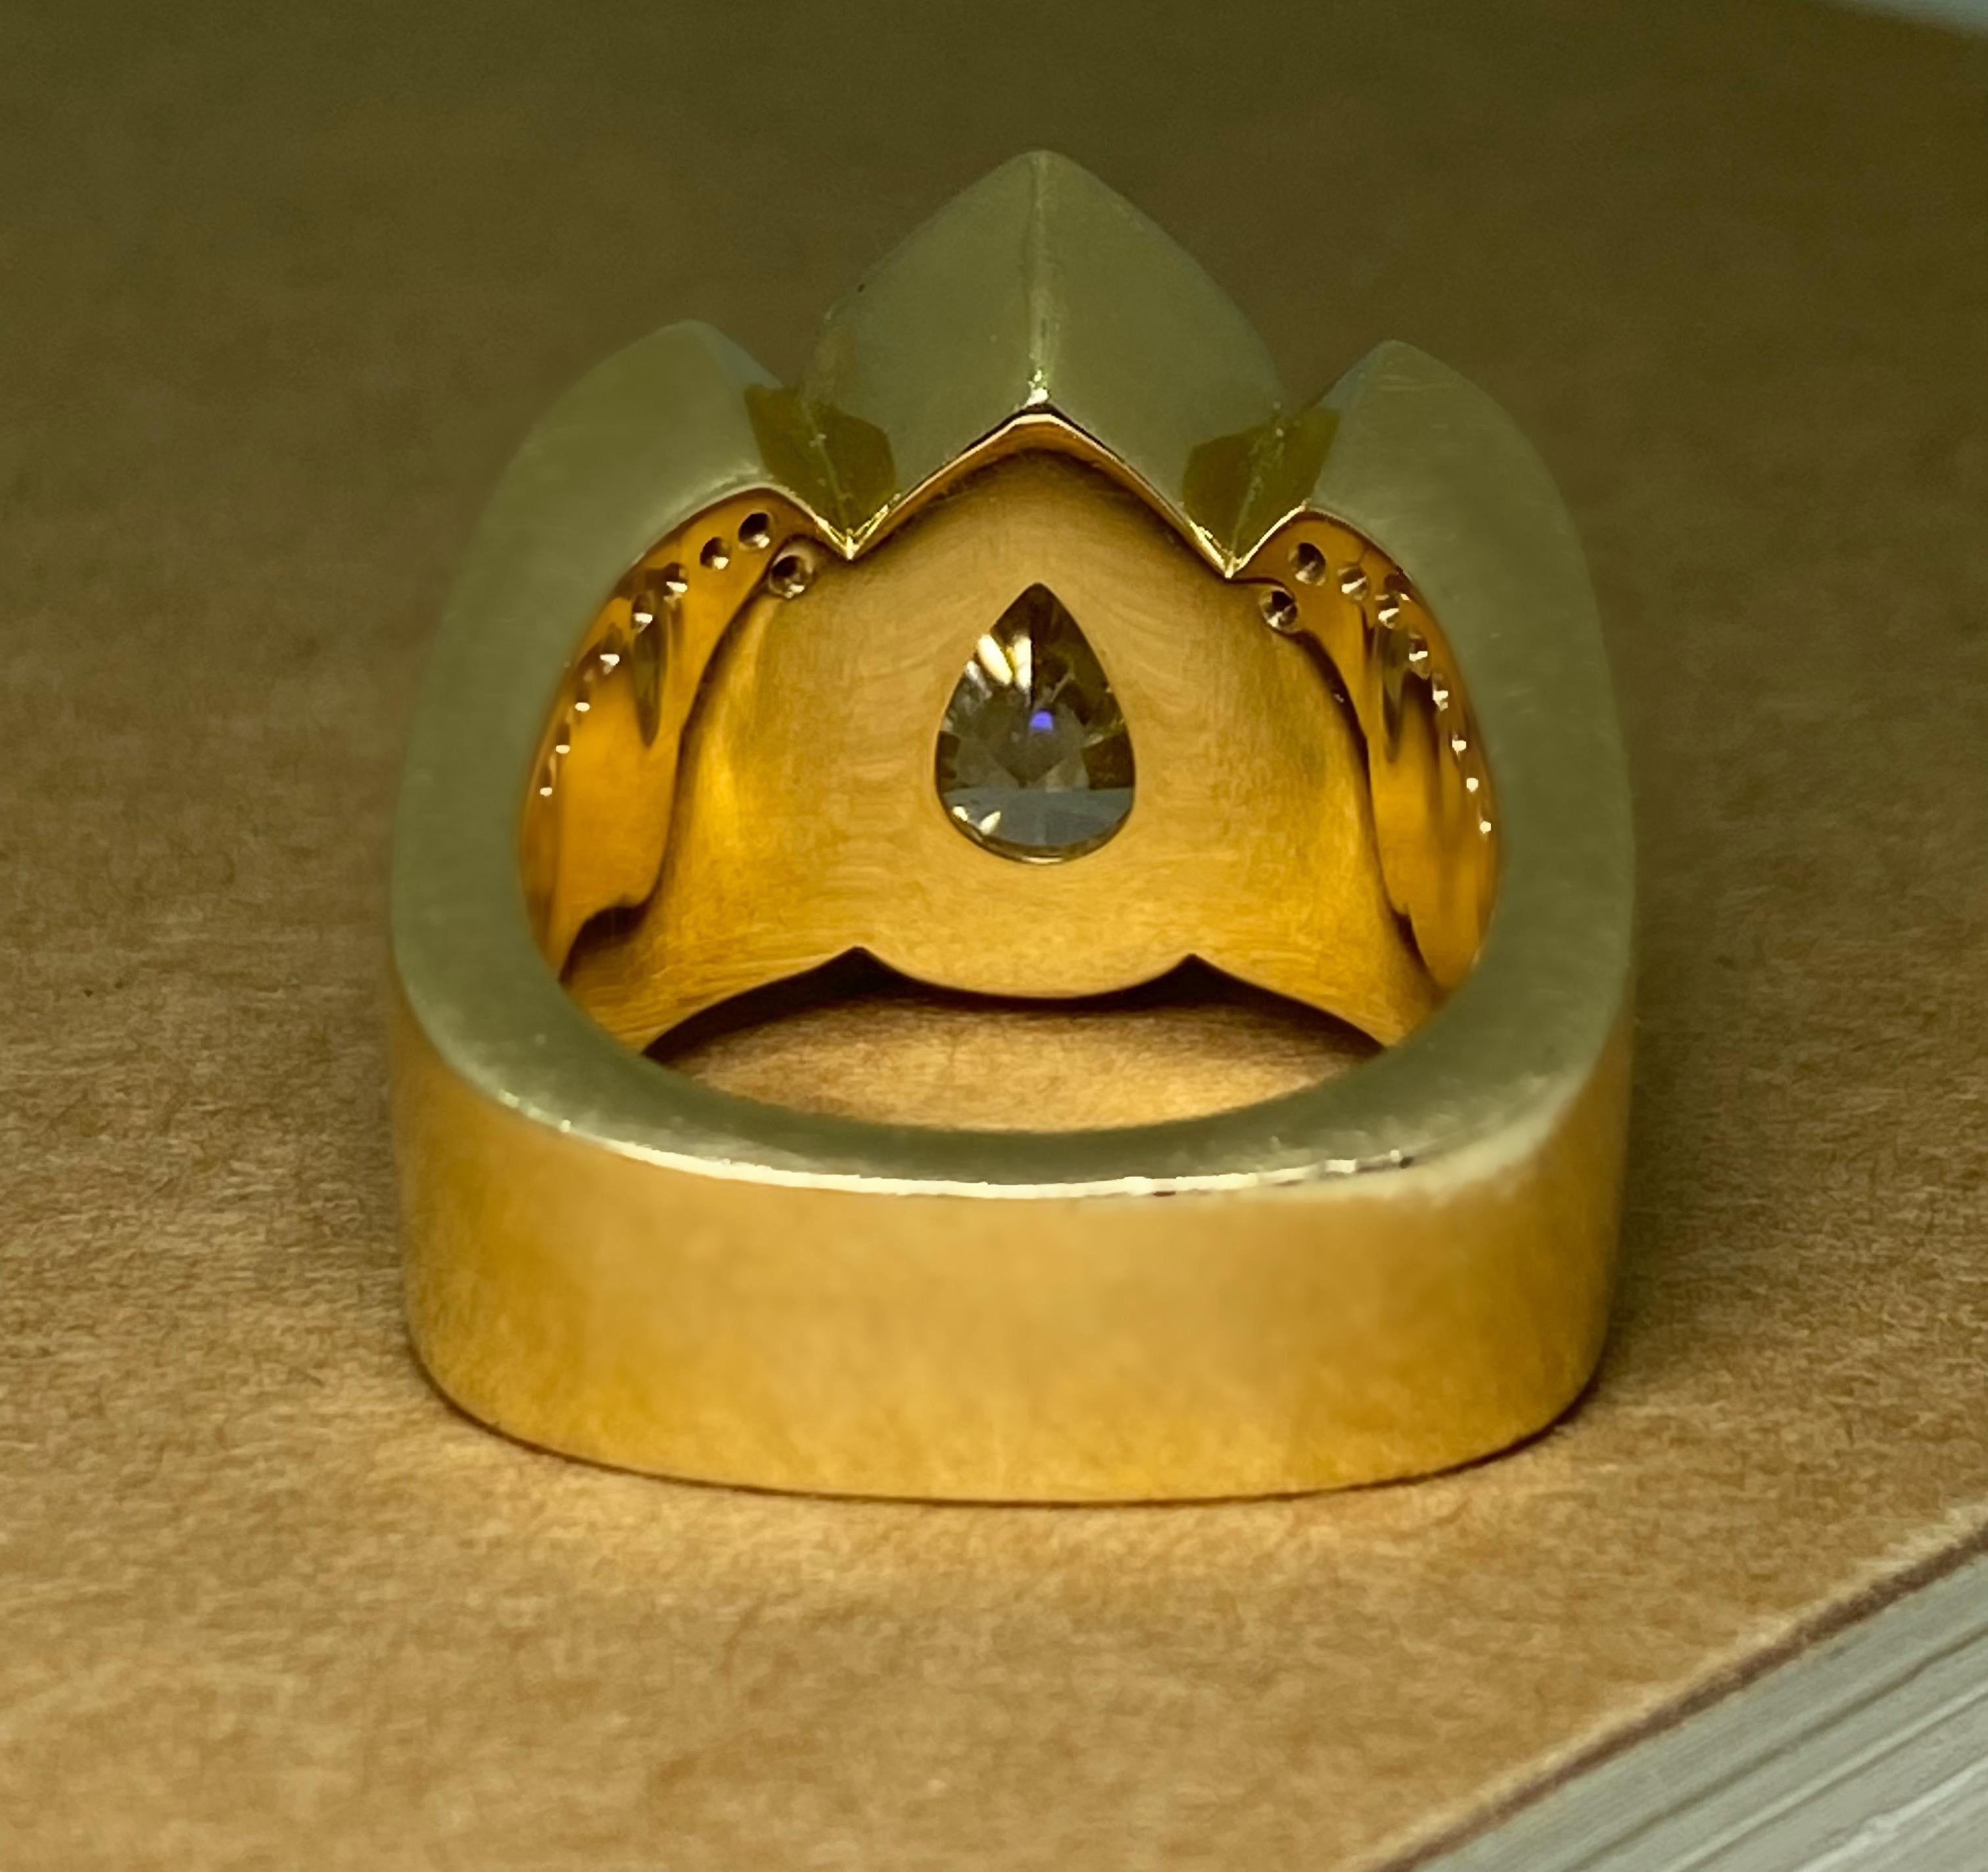 Natural 12.00ct Pear Shaped/Cut Diamond Ring in 18K Yellow Gold, valued at 490K 1